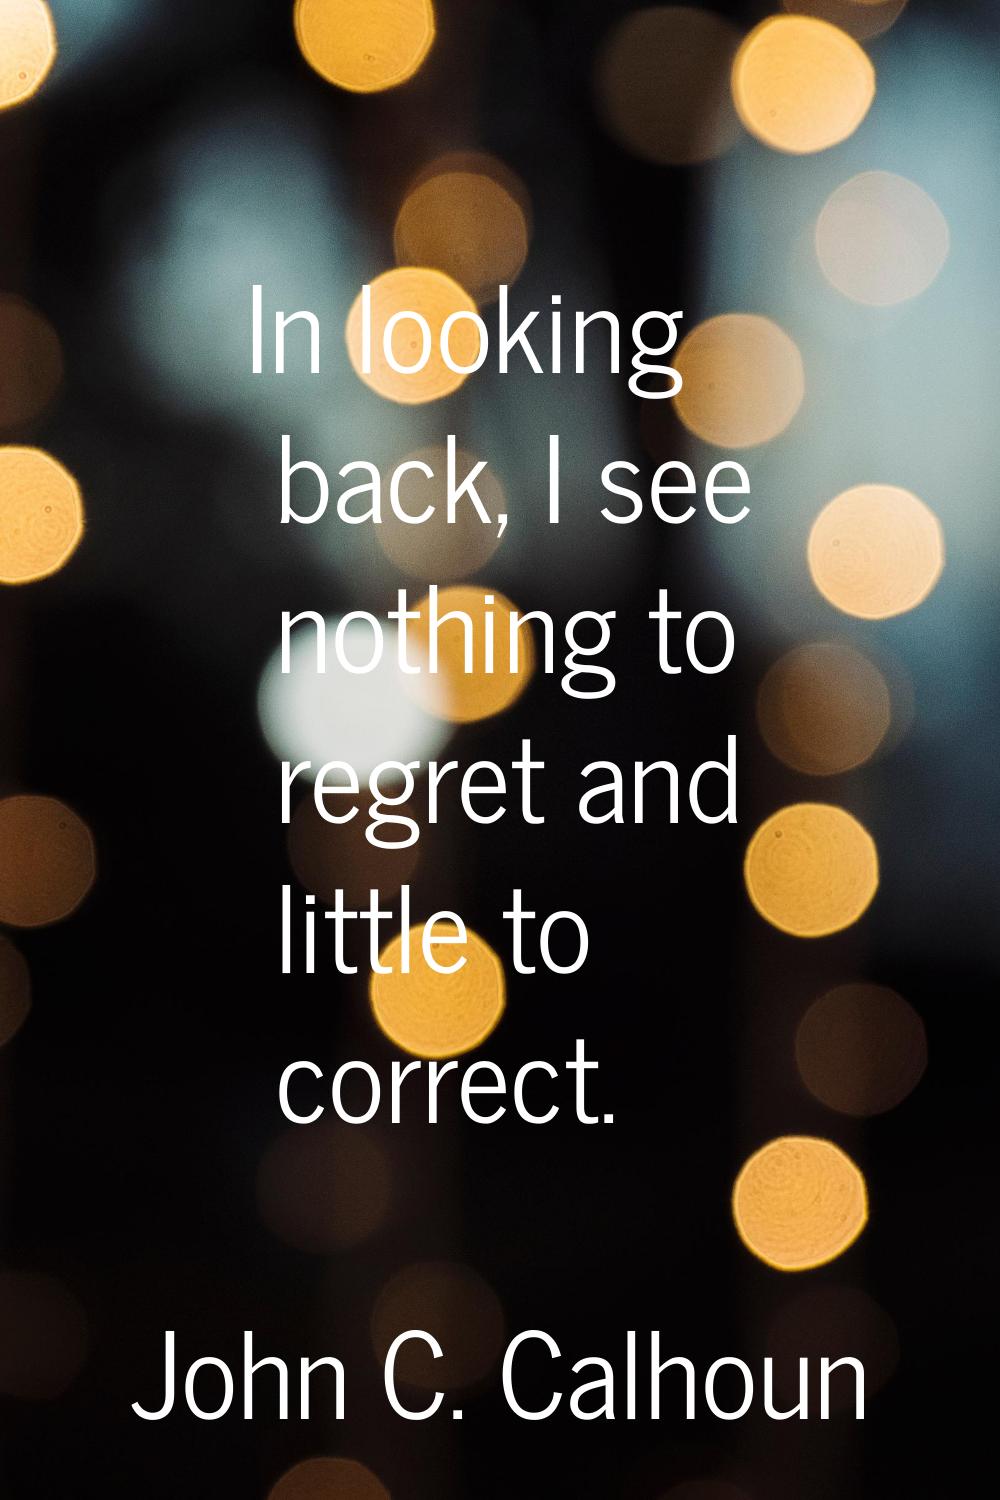 In looking back, I see nothing to regret and little to correct.